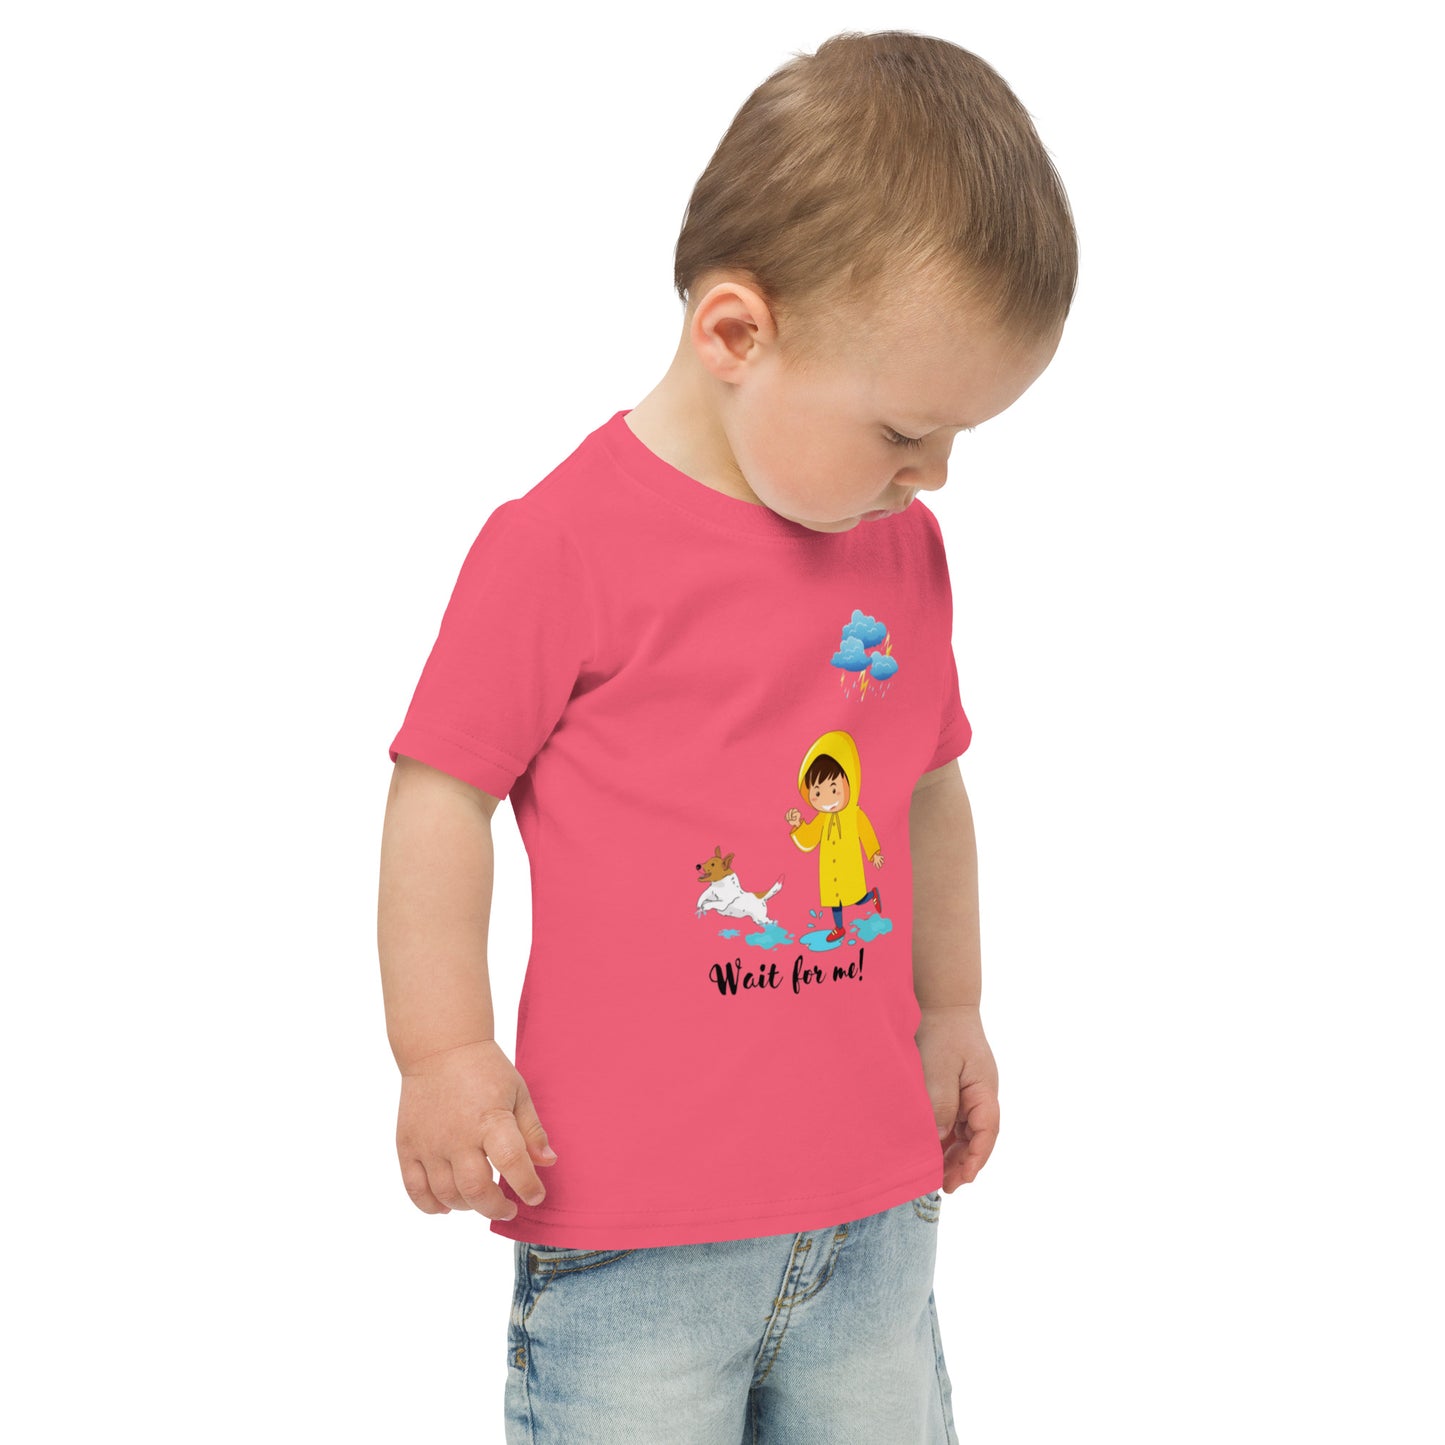 Wait For Me Toddler jersey t-shirt